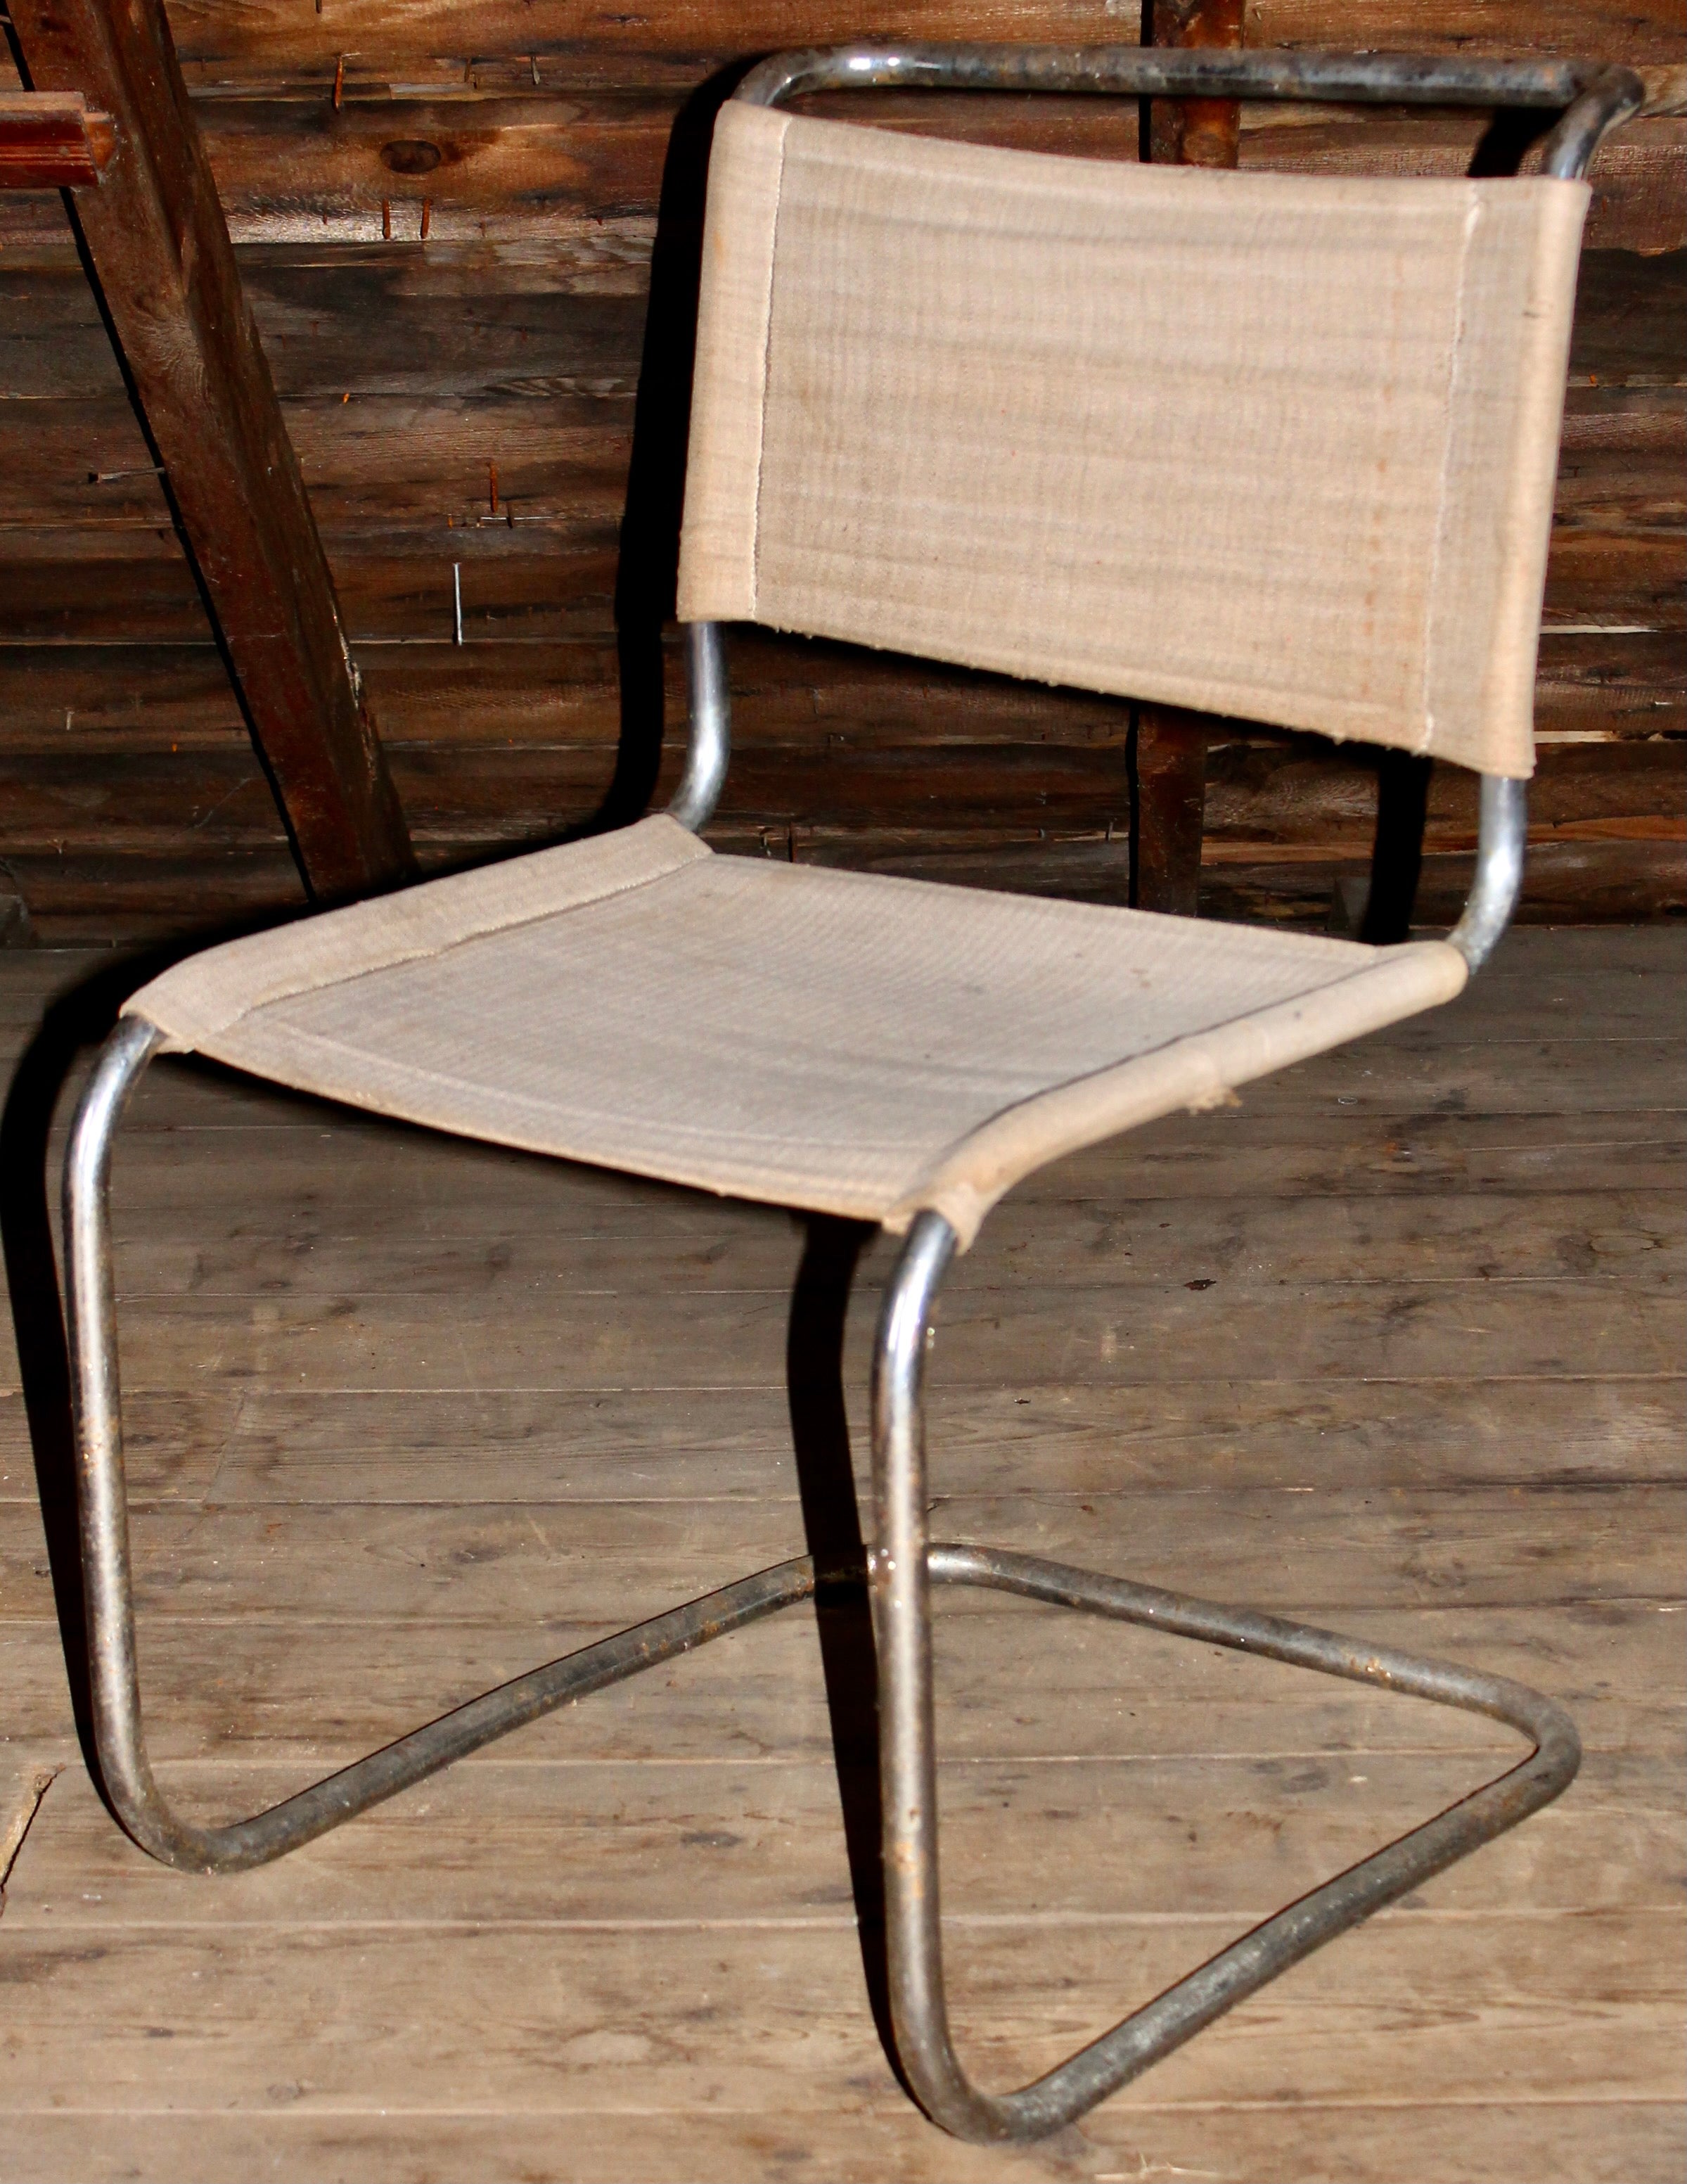 Four original period cantilever canvas and tubular steel side chairs. Manufactured by Thonet or Robert Slezak.